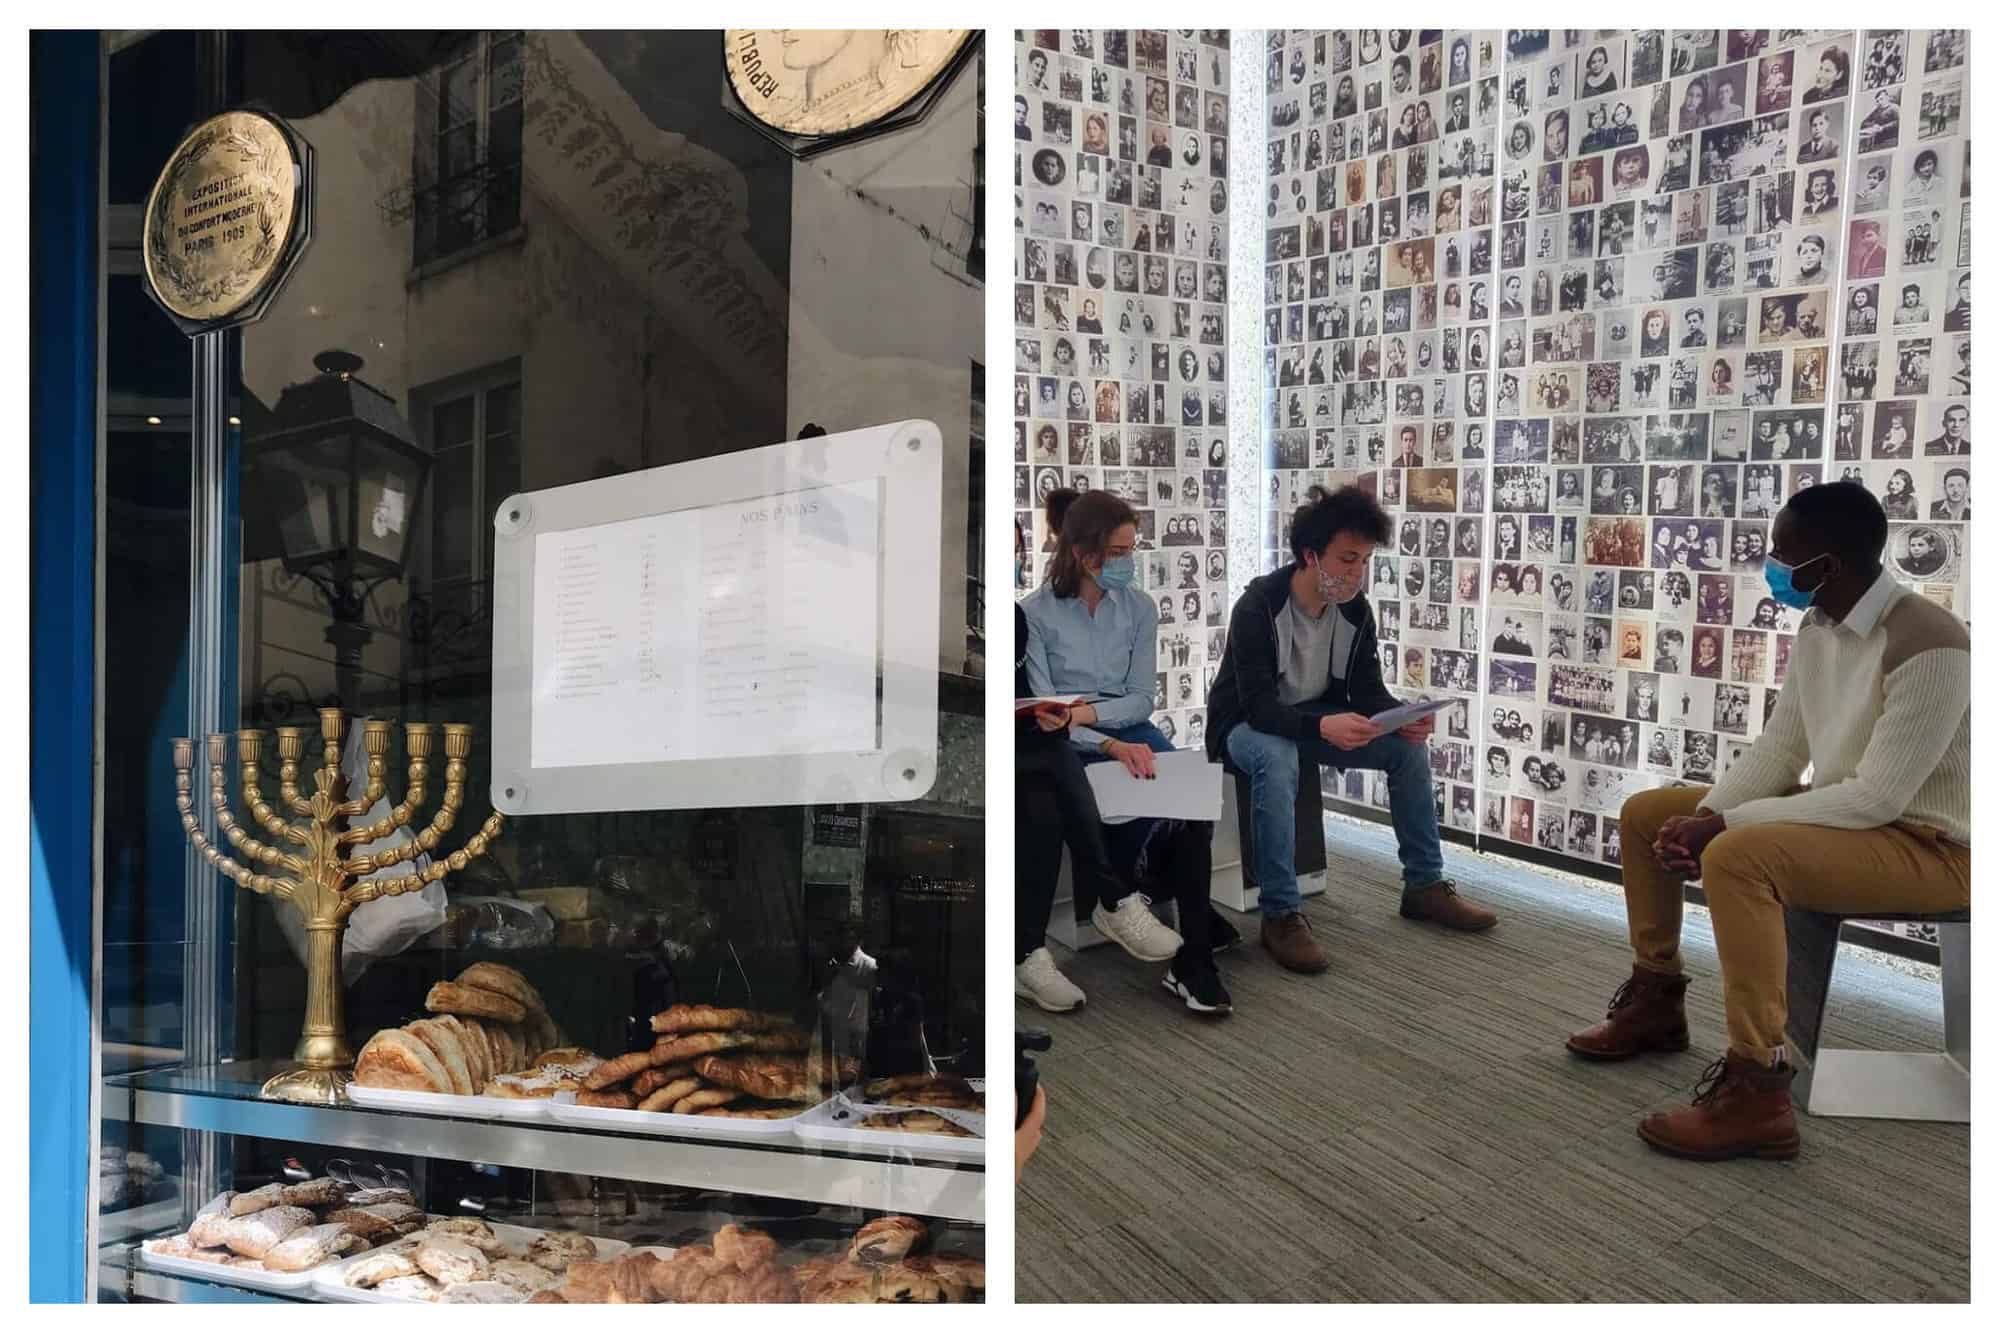 Left: The window of Boulangerie Murciano in Paris. Right: A tour group inside of Memorial Shoah.